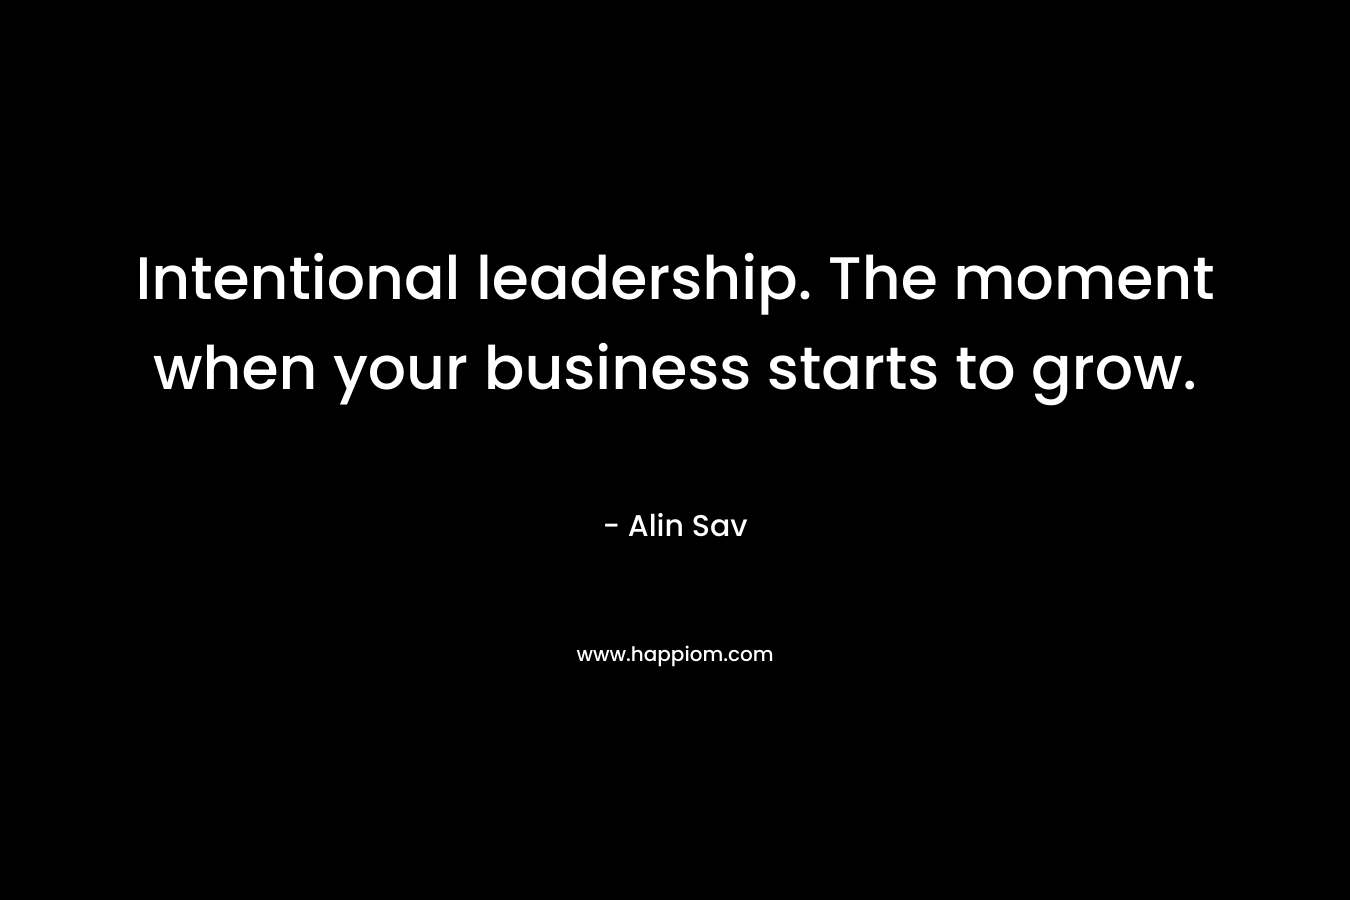 Intentional leadership. The moment when your business starts to grow.